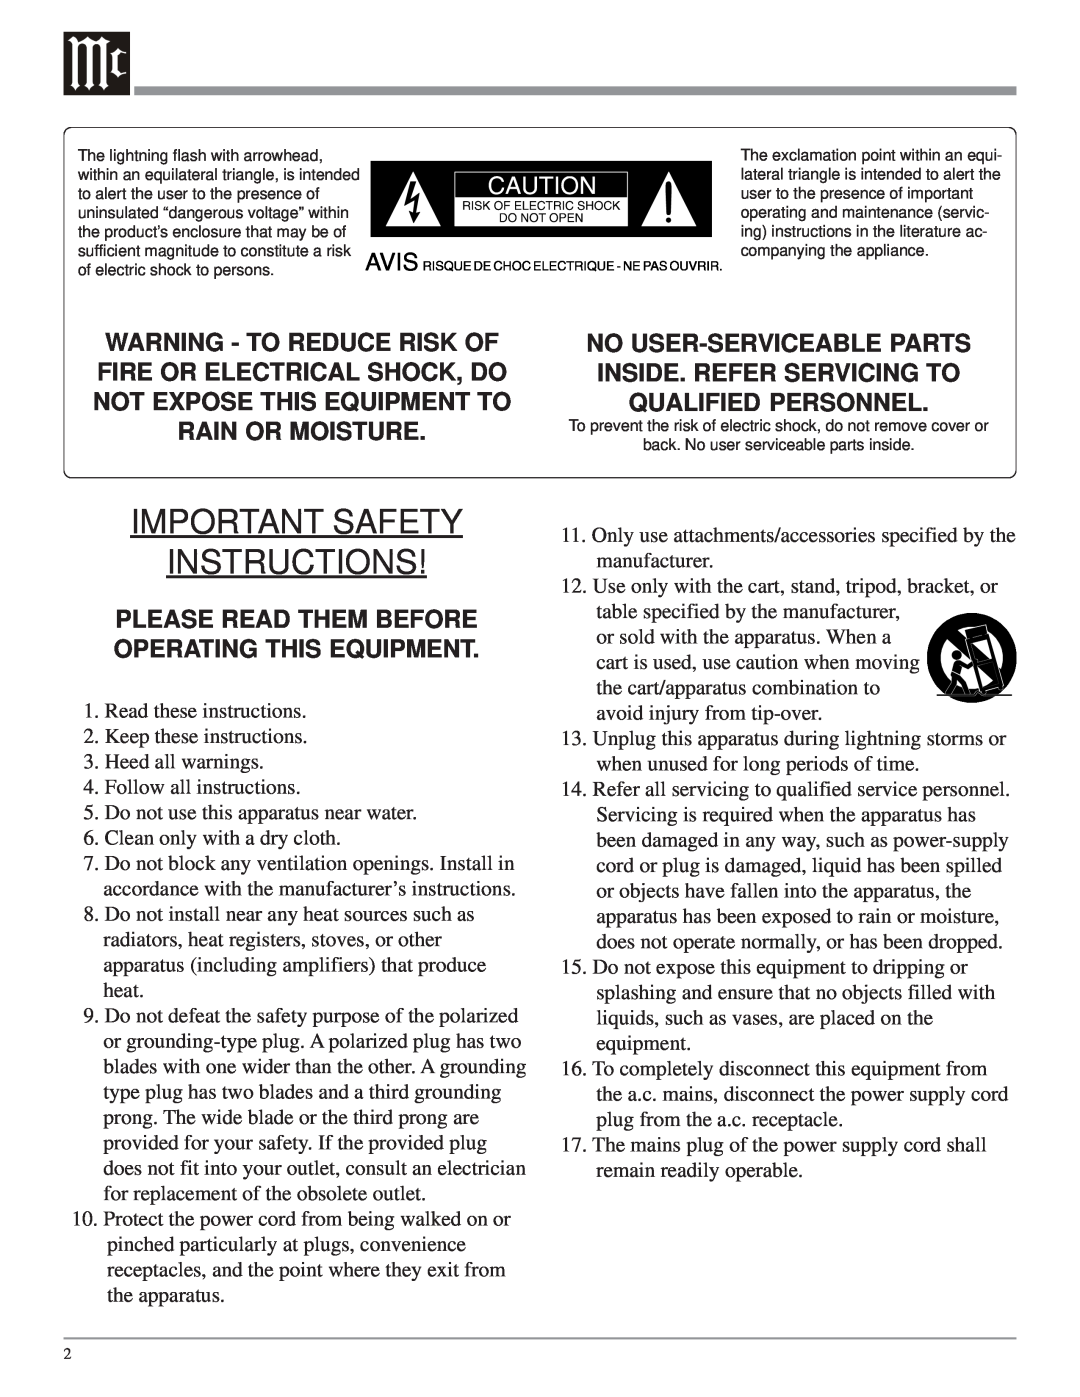 McIntosh MC275 owner manual Important Safety Instructions, Please Read Them Before Operating This Equipment 